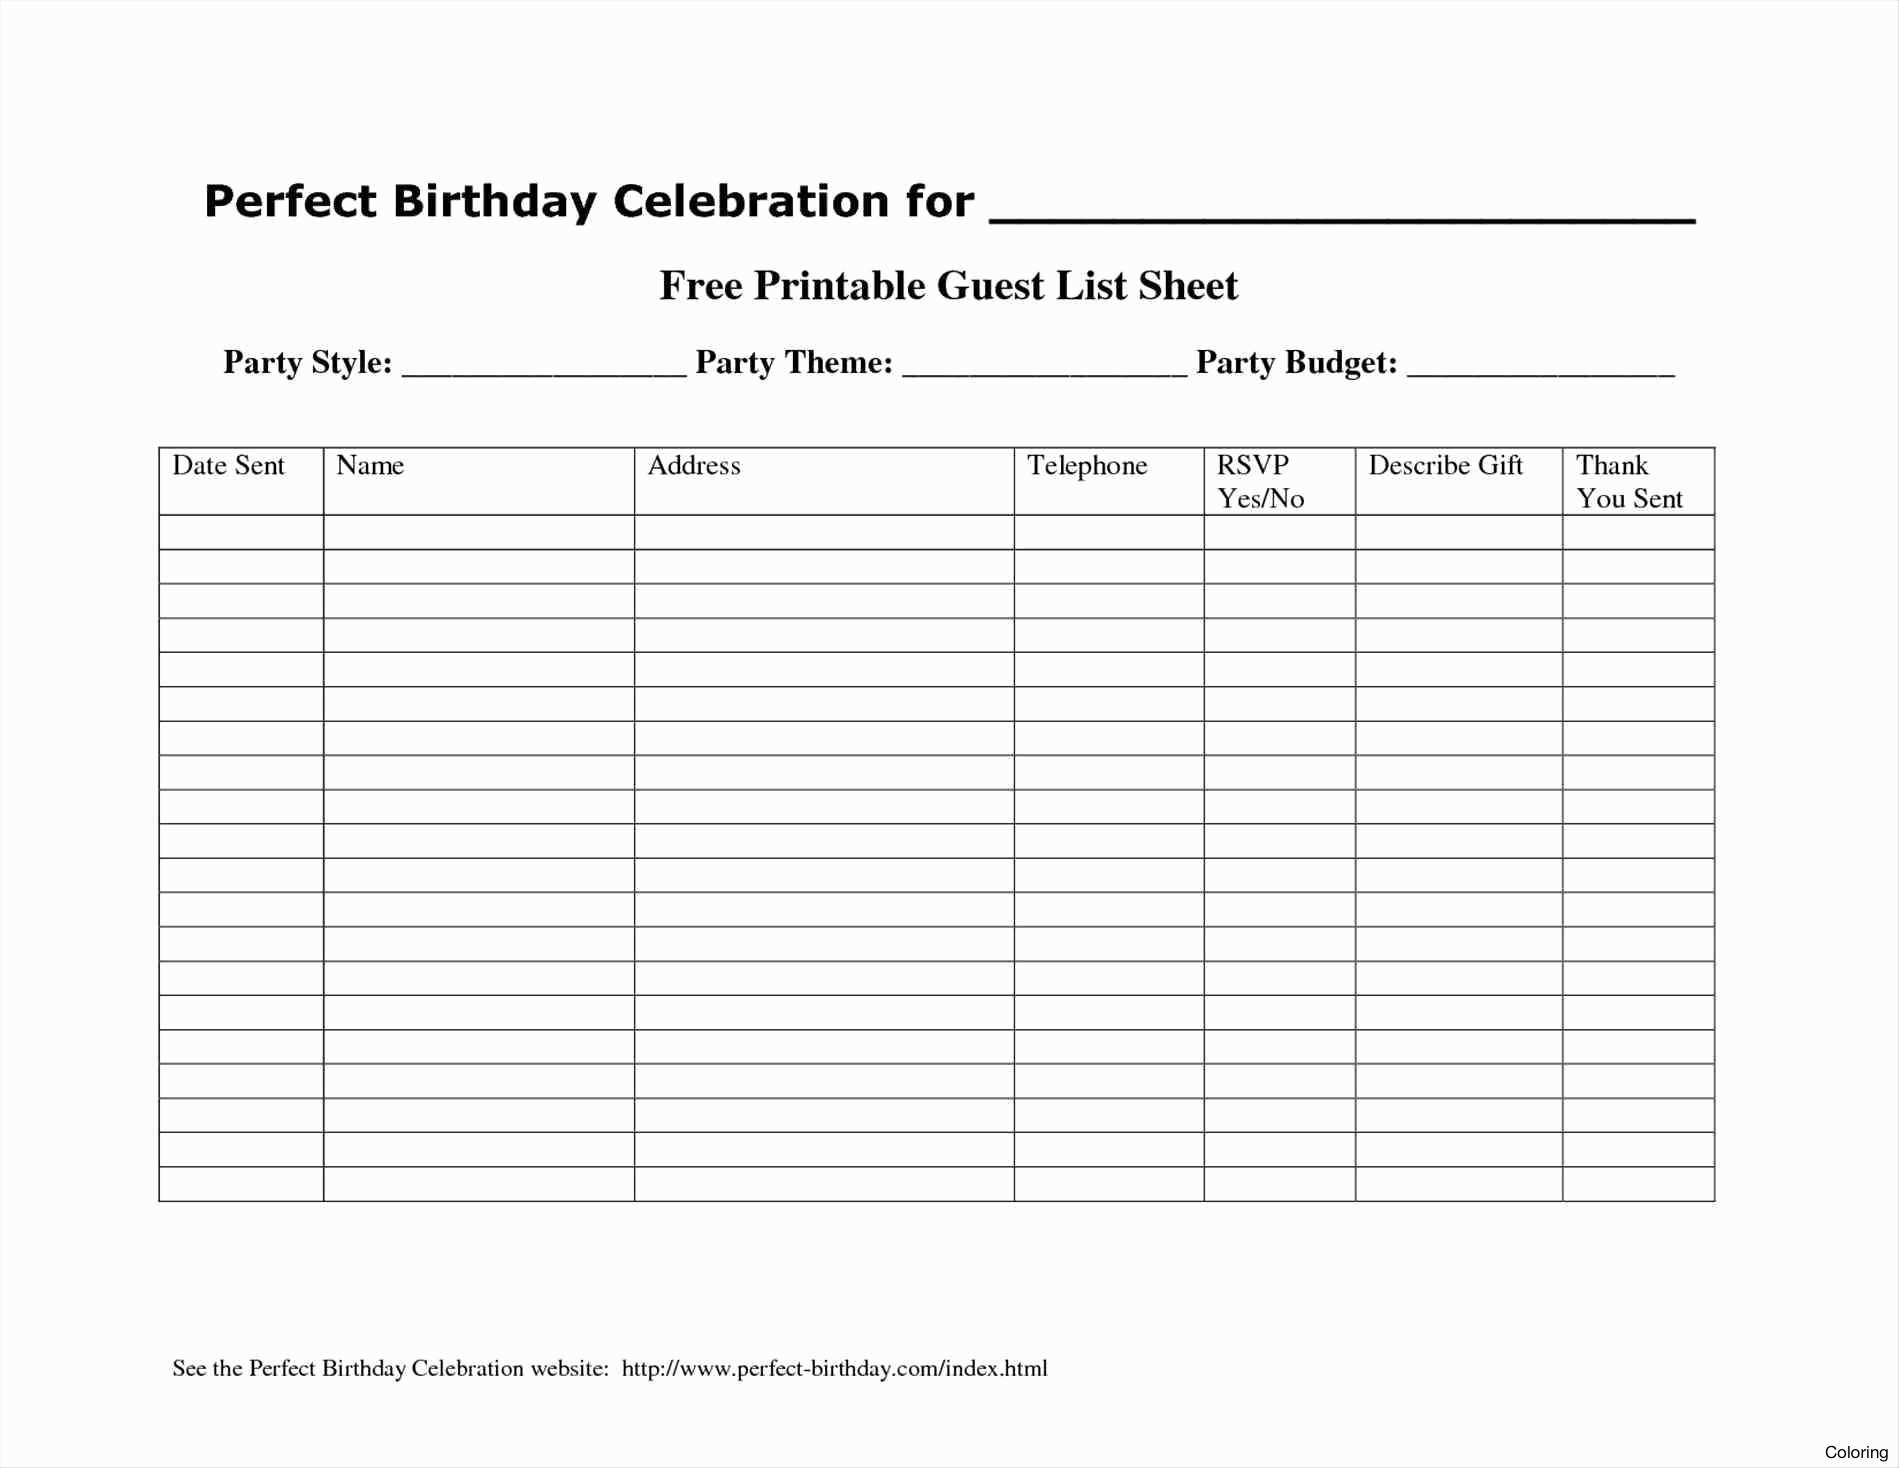 Birthday Gift List Template from legaldbol.com